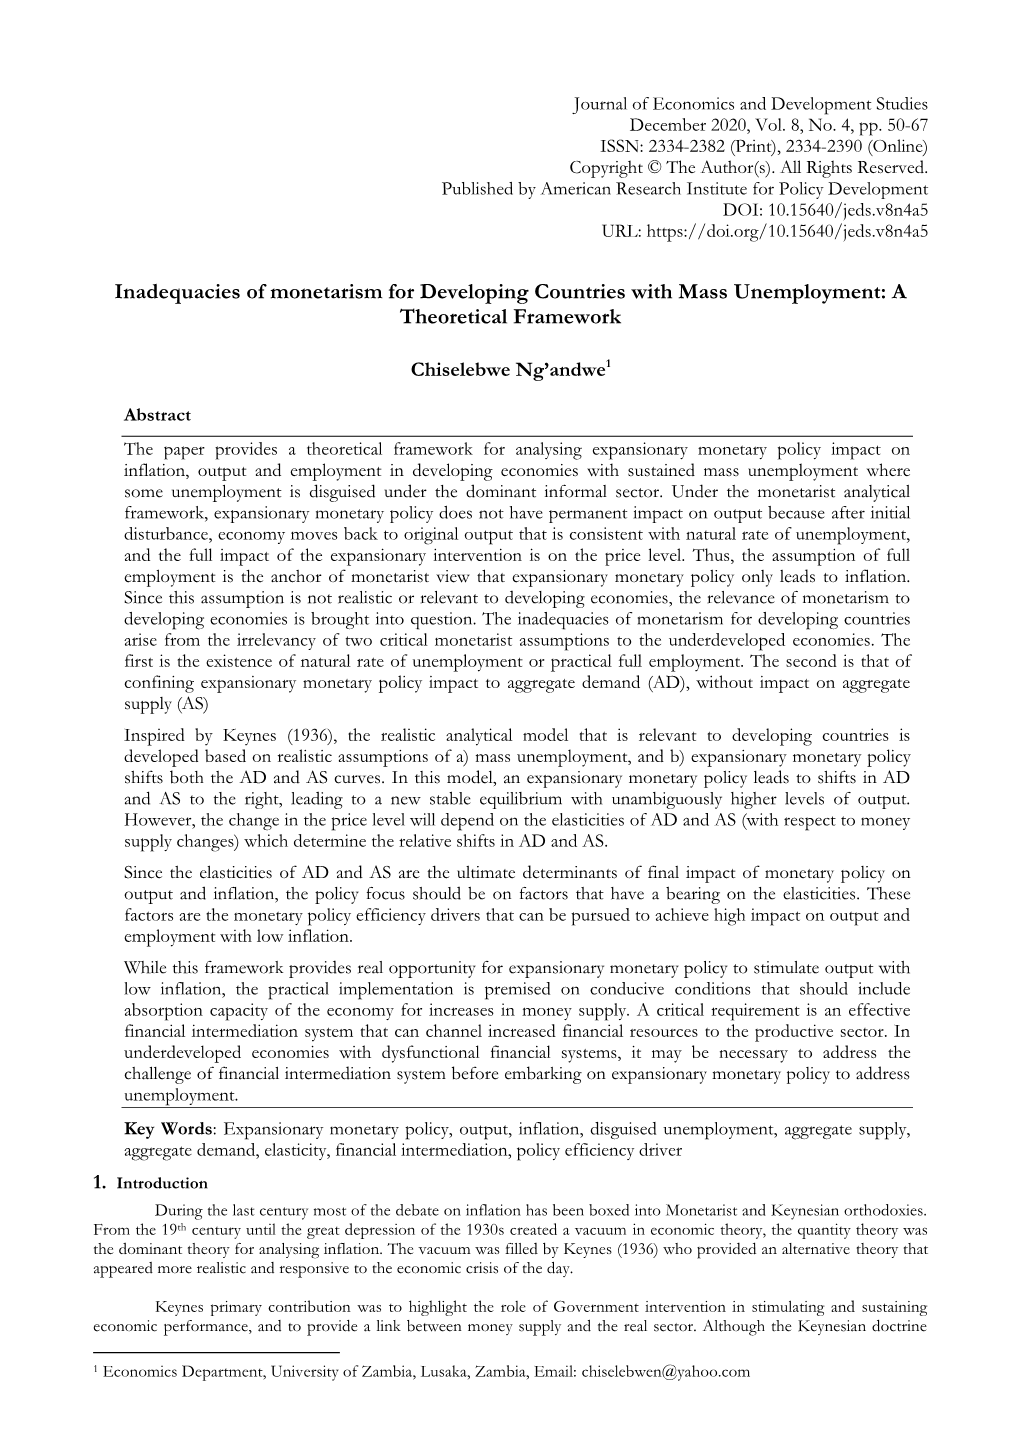 Inadequacies of Monetarism for Developing Countries with Mass Unemployment: a Theoretical Framework